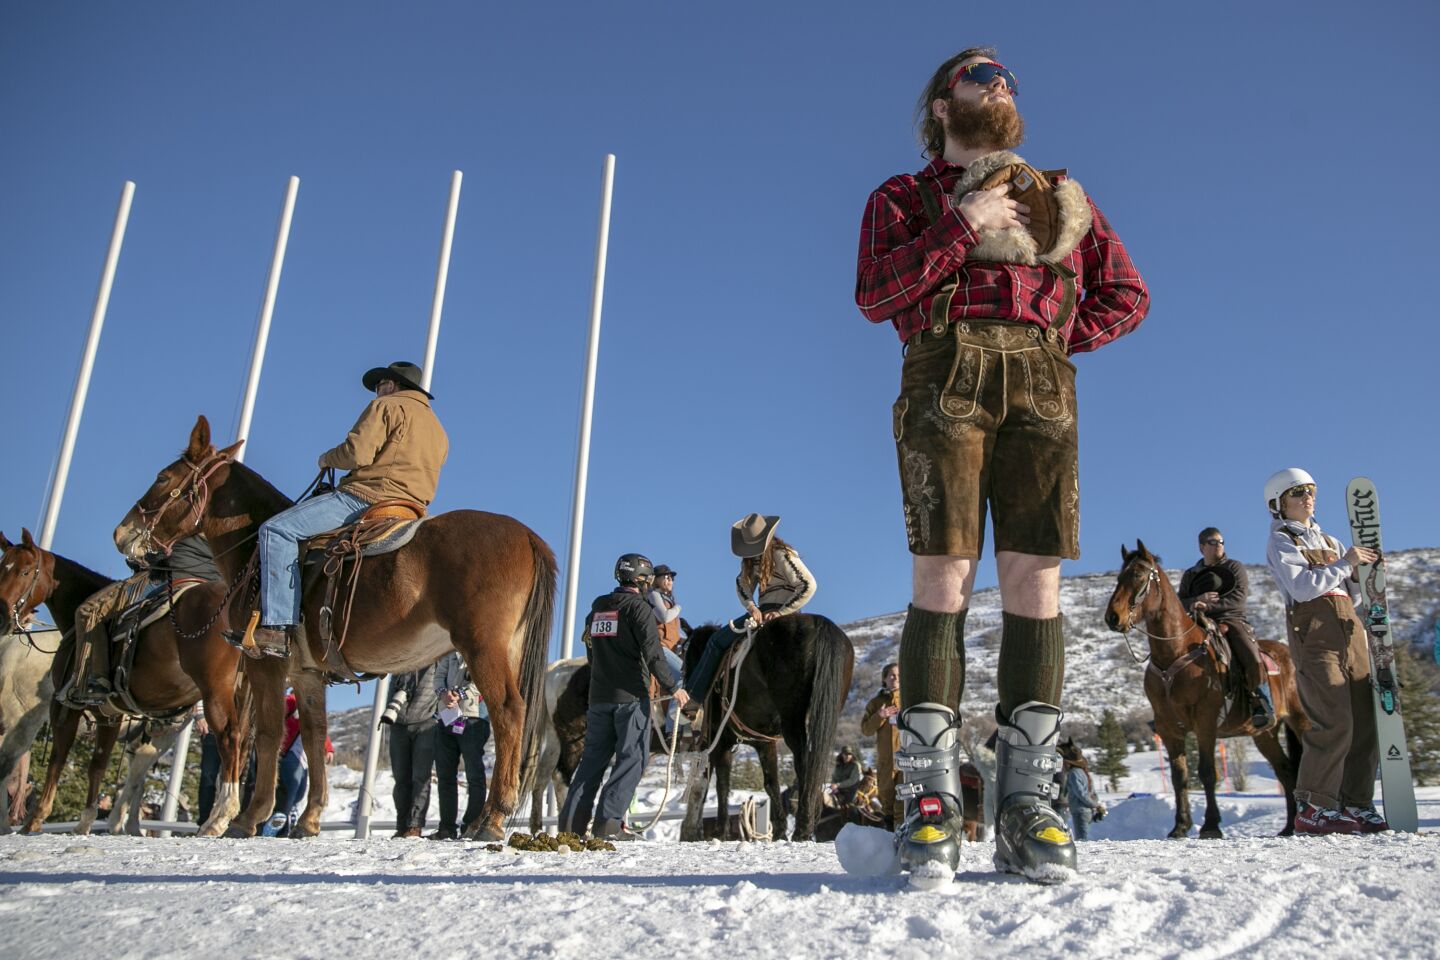 Caden Spencer stands for the national anthem at the start of Skijoring Utah. Riders and skiers team up to compete in a two-day rodeo-like event in which skiers are pulled through an obstacle course by a rope attached to a horse and rider at Soldier Hollow Nordic Center.